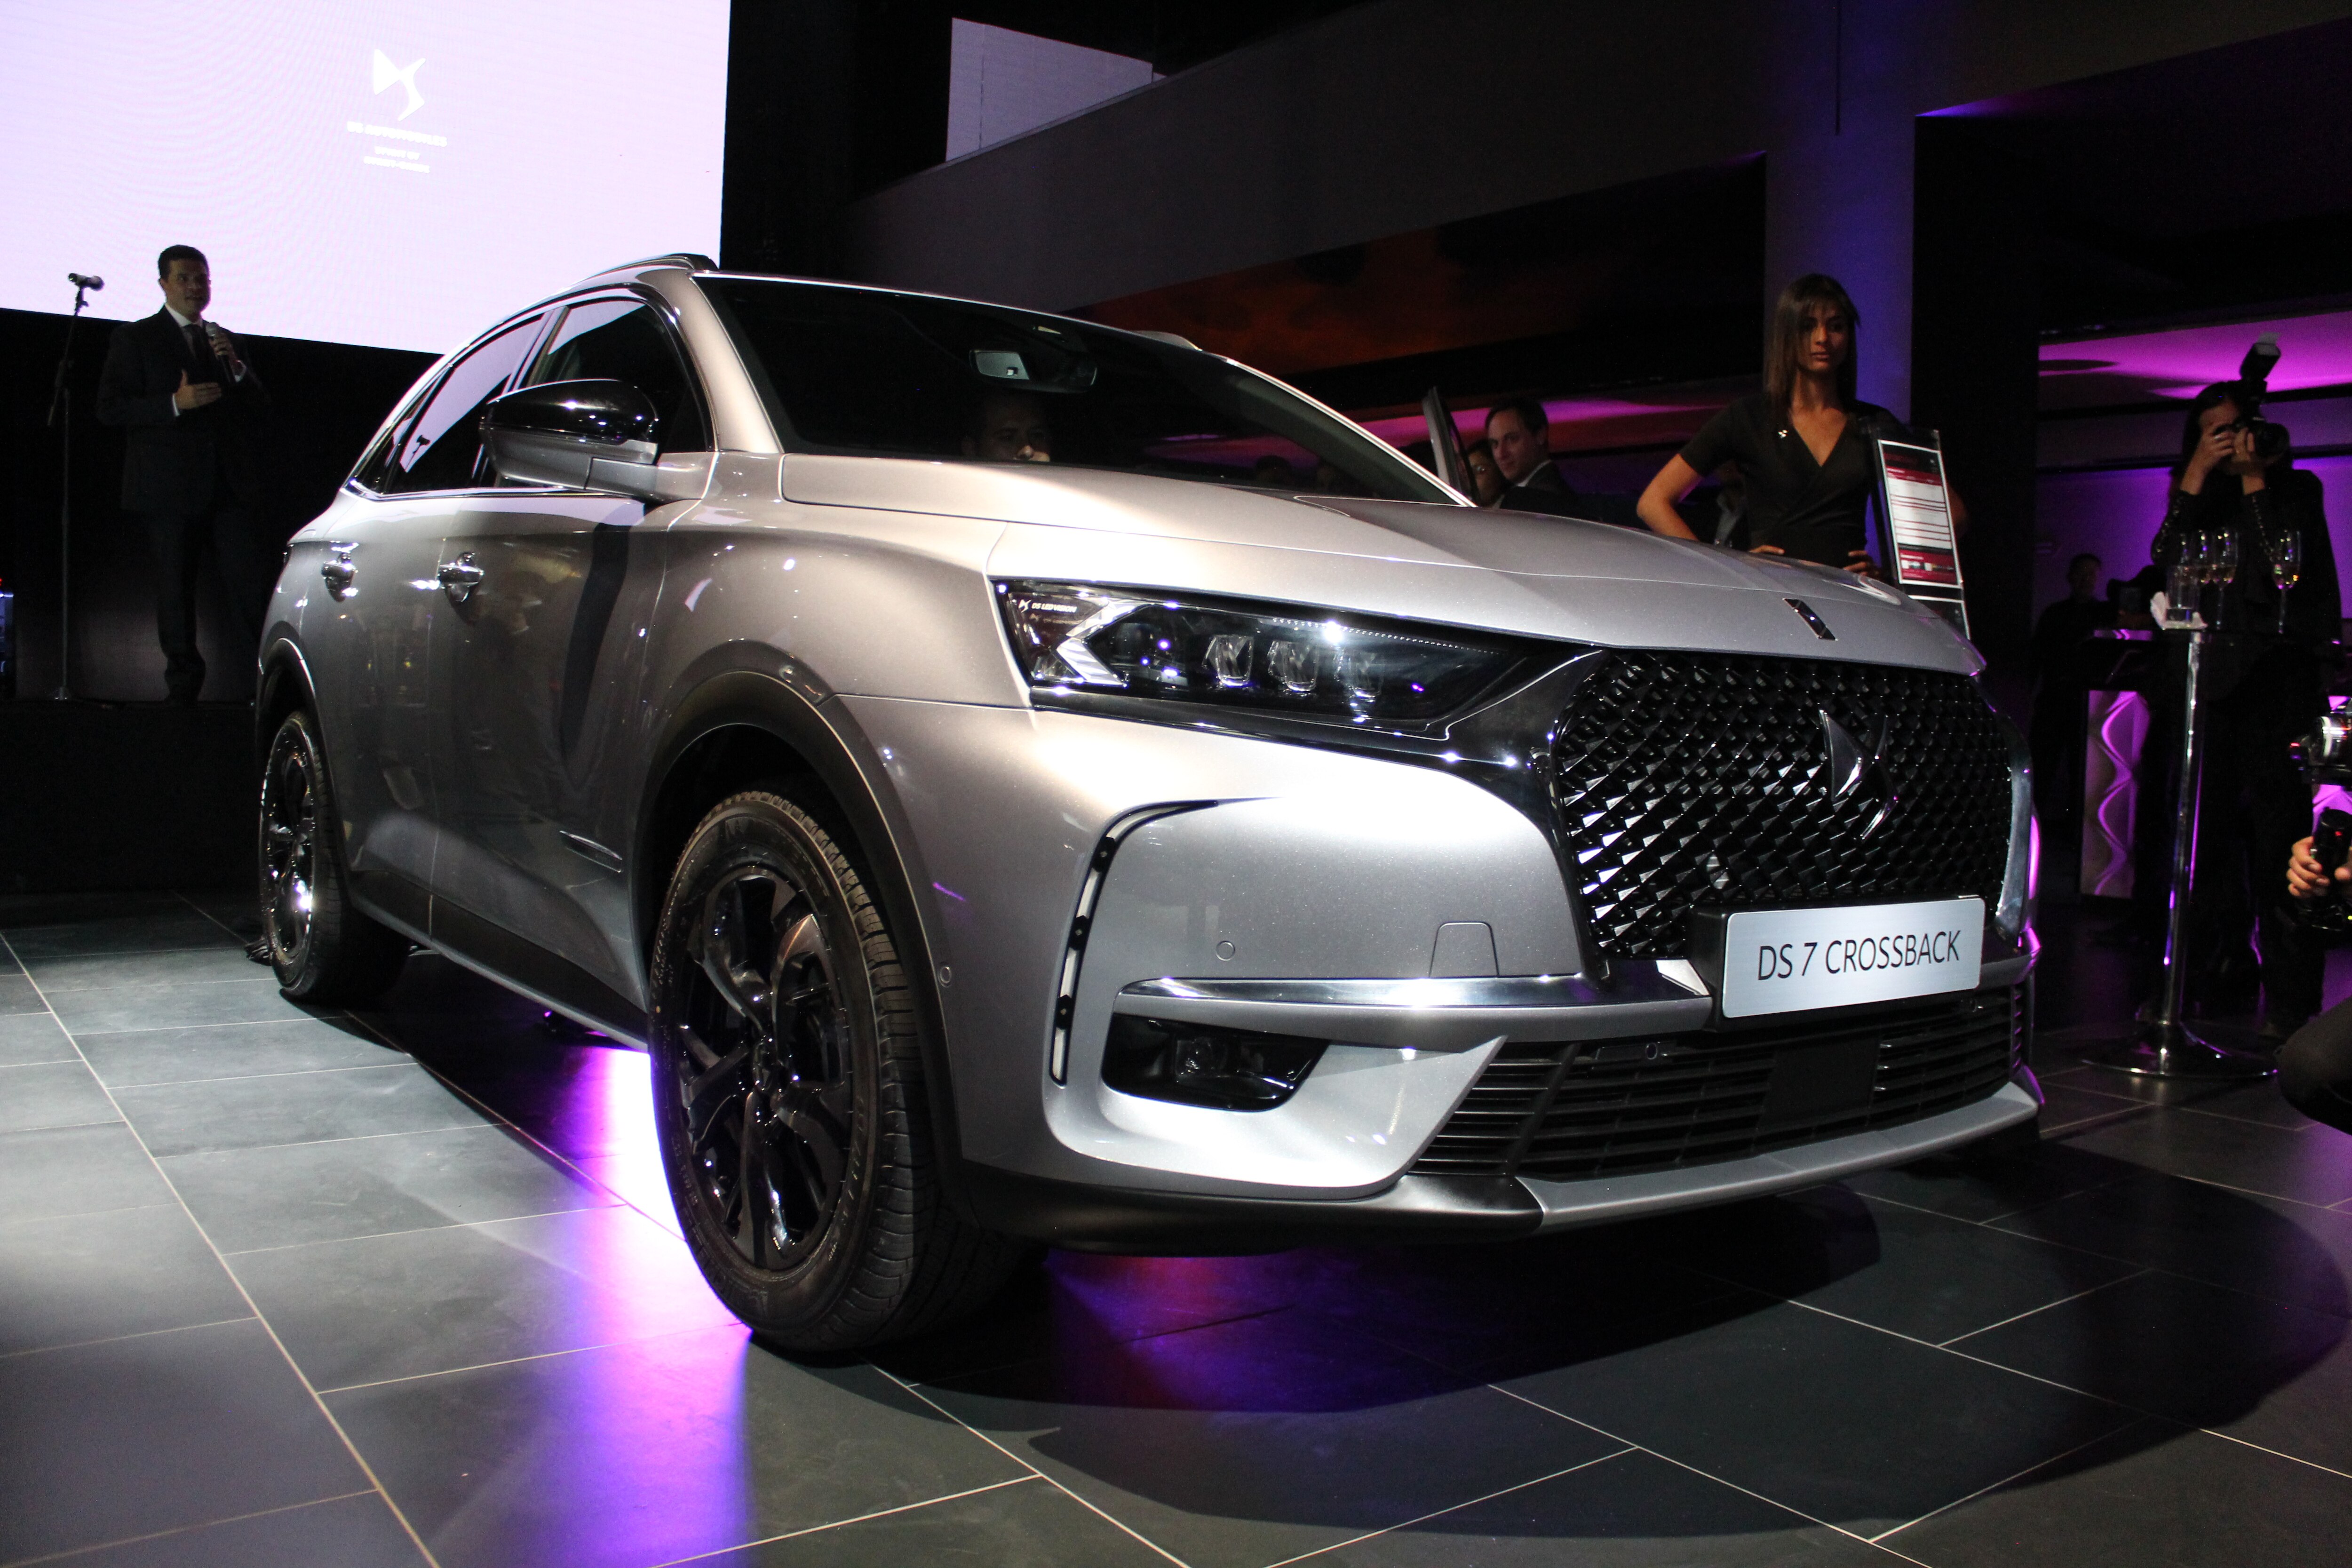 DS 7 Crossback exterior specifications